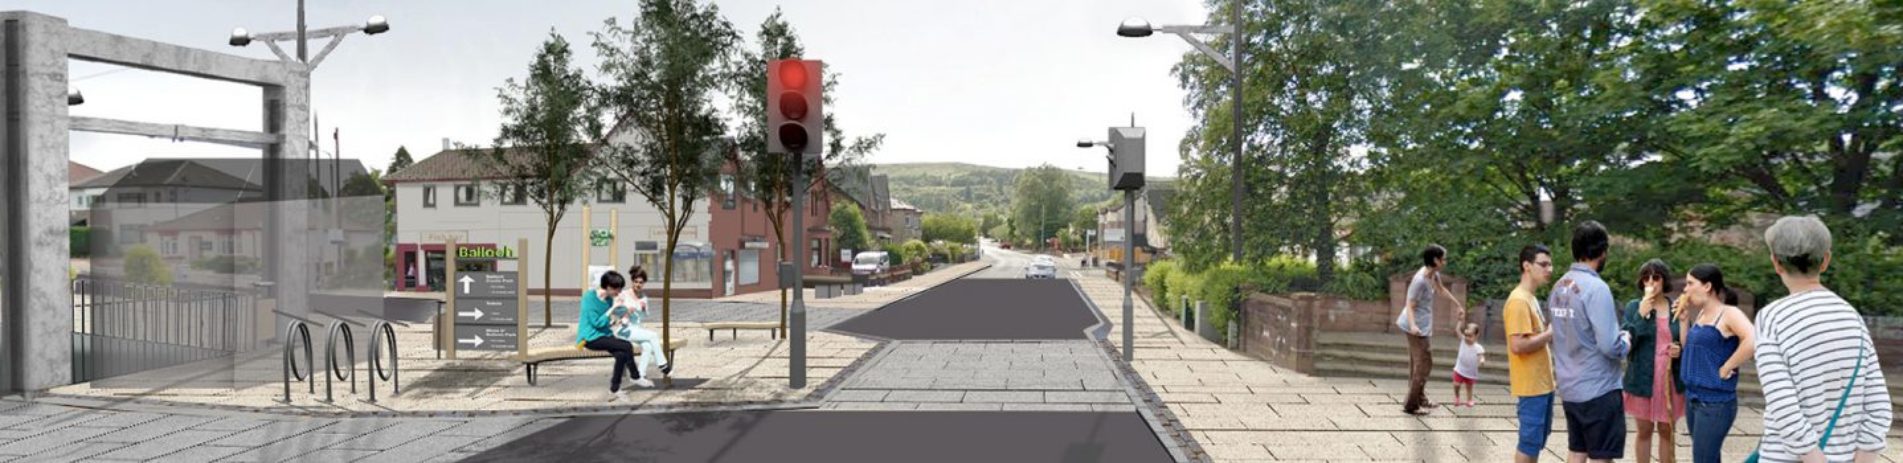 balloch-virtual-reality-composition-of-idealized-view-of-main-street-pedestrianised